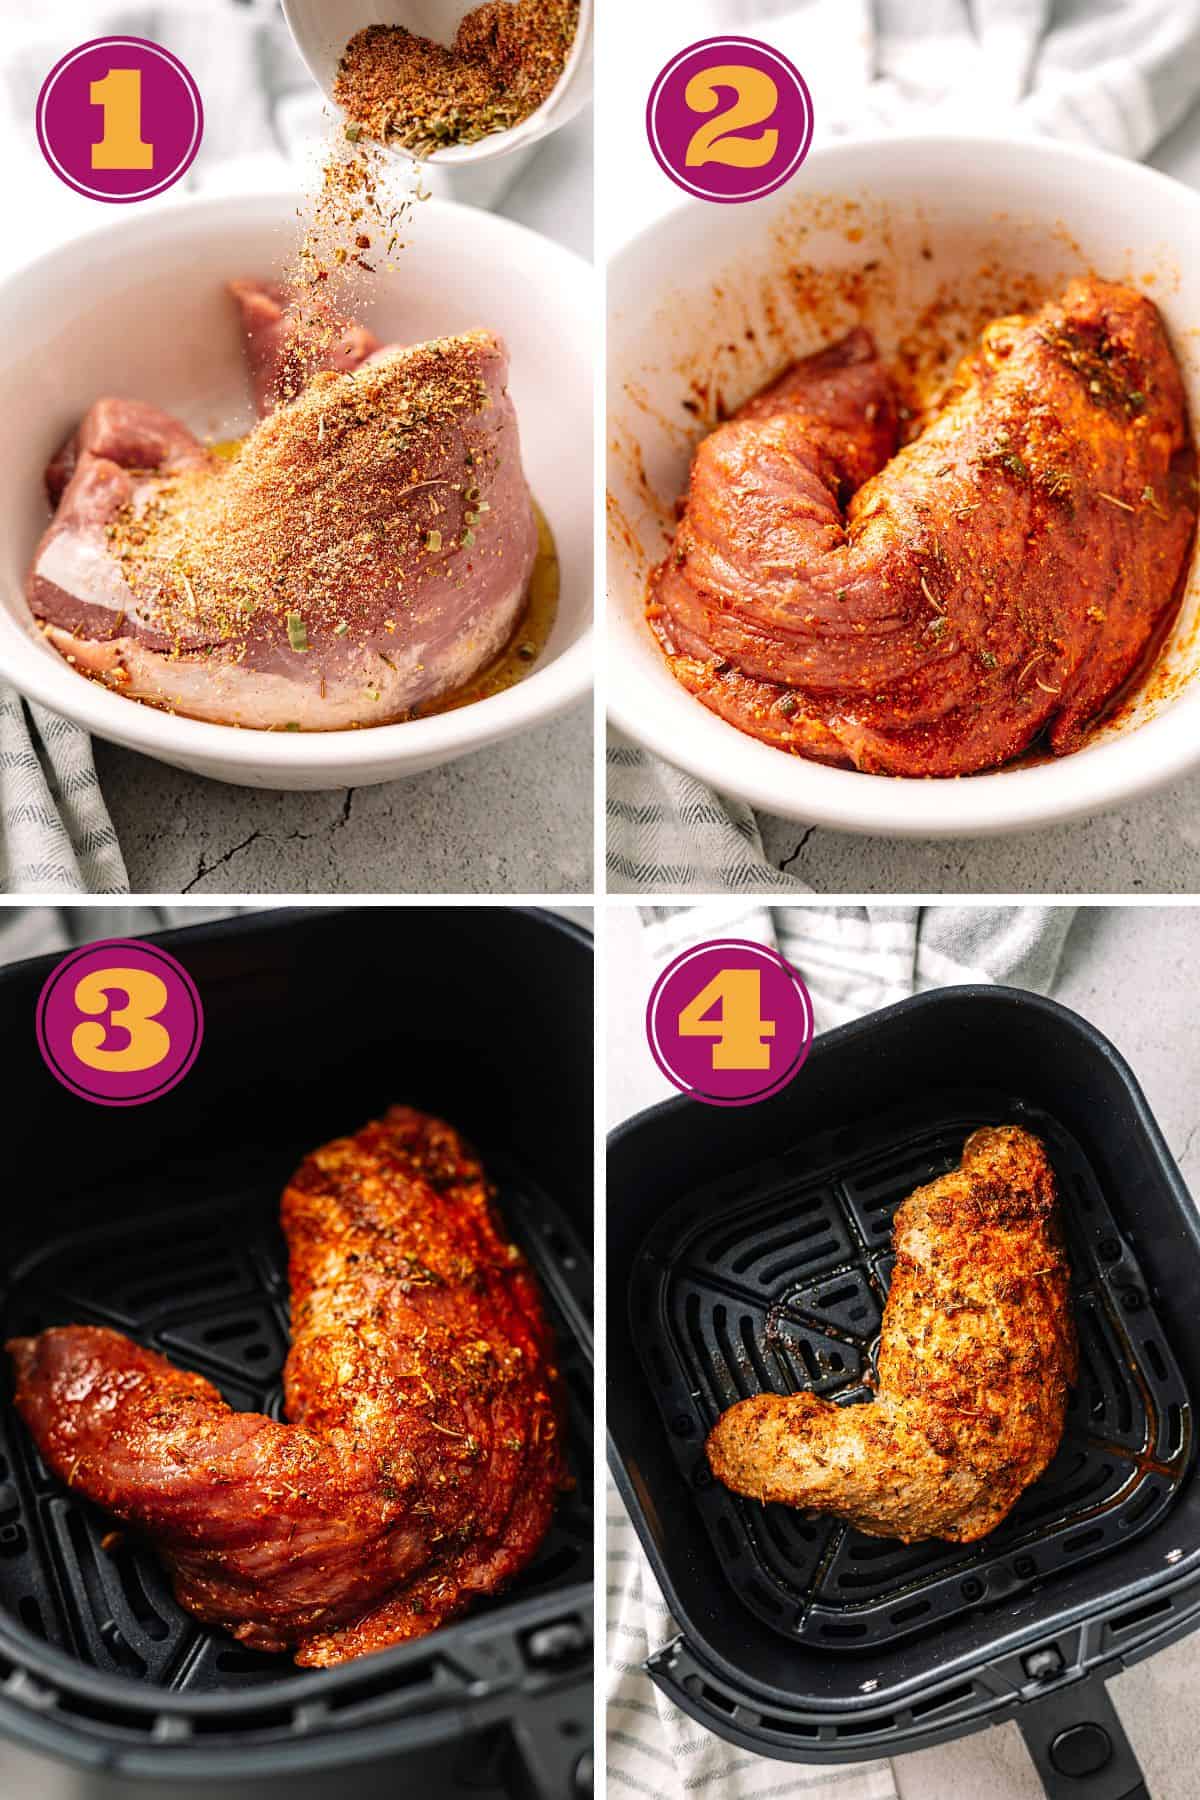 step-by-step instructions for how to cook Turkey breast Tenderloin in an Ninja air fryer